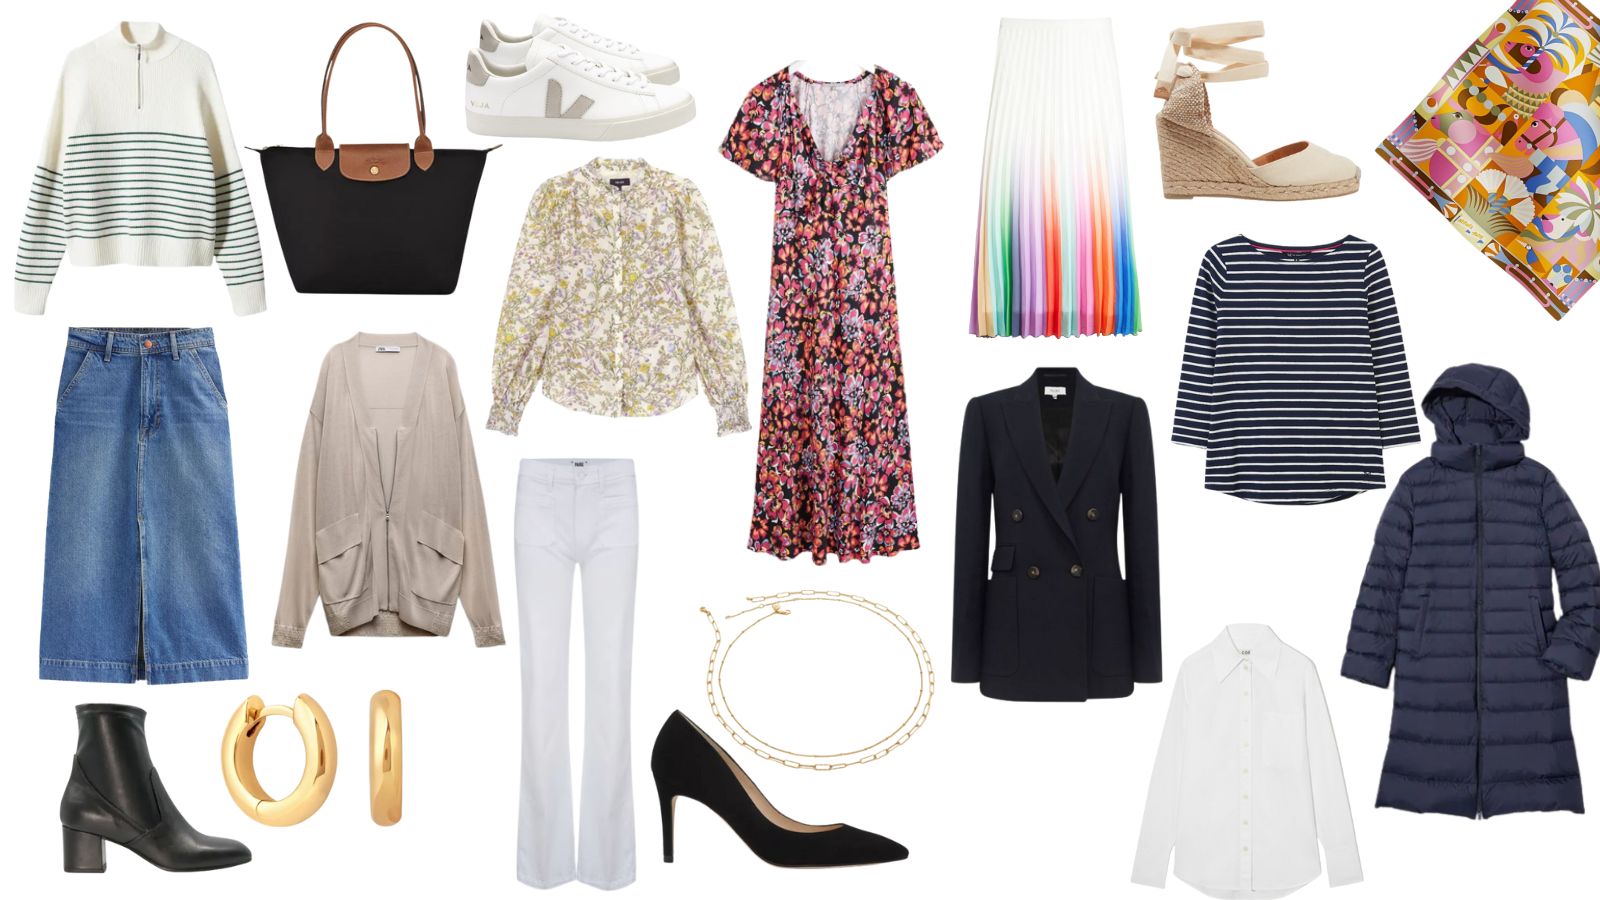 A set of casual fashion women about hobbies and lifestyle.type A